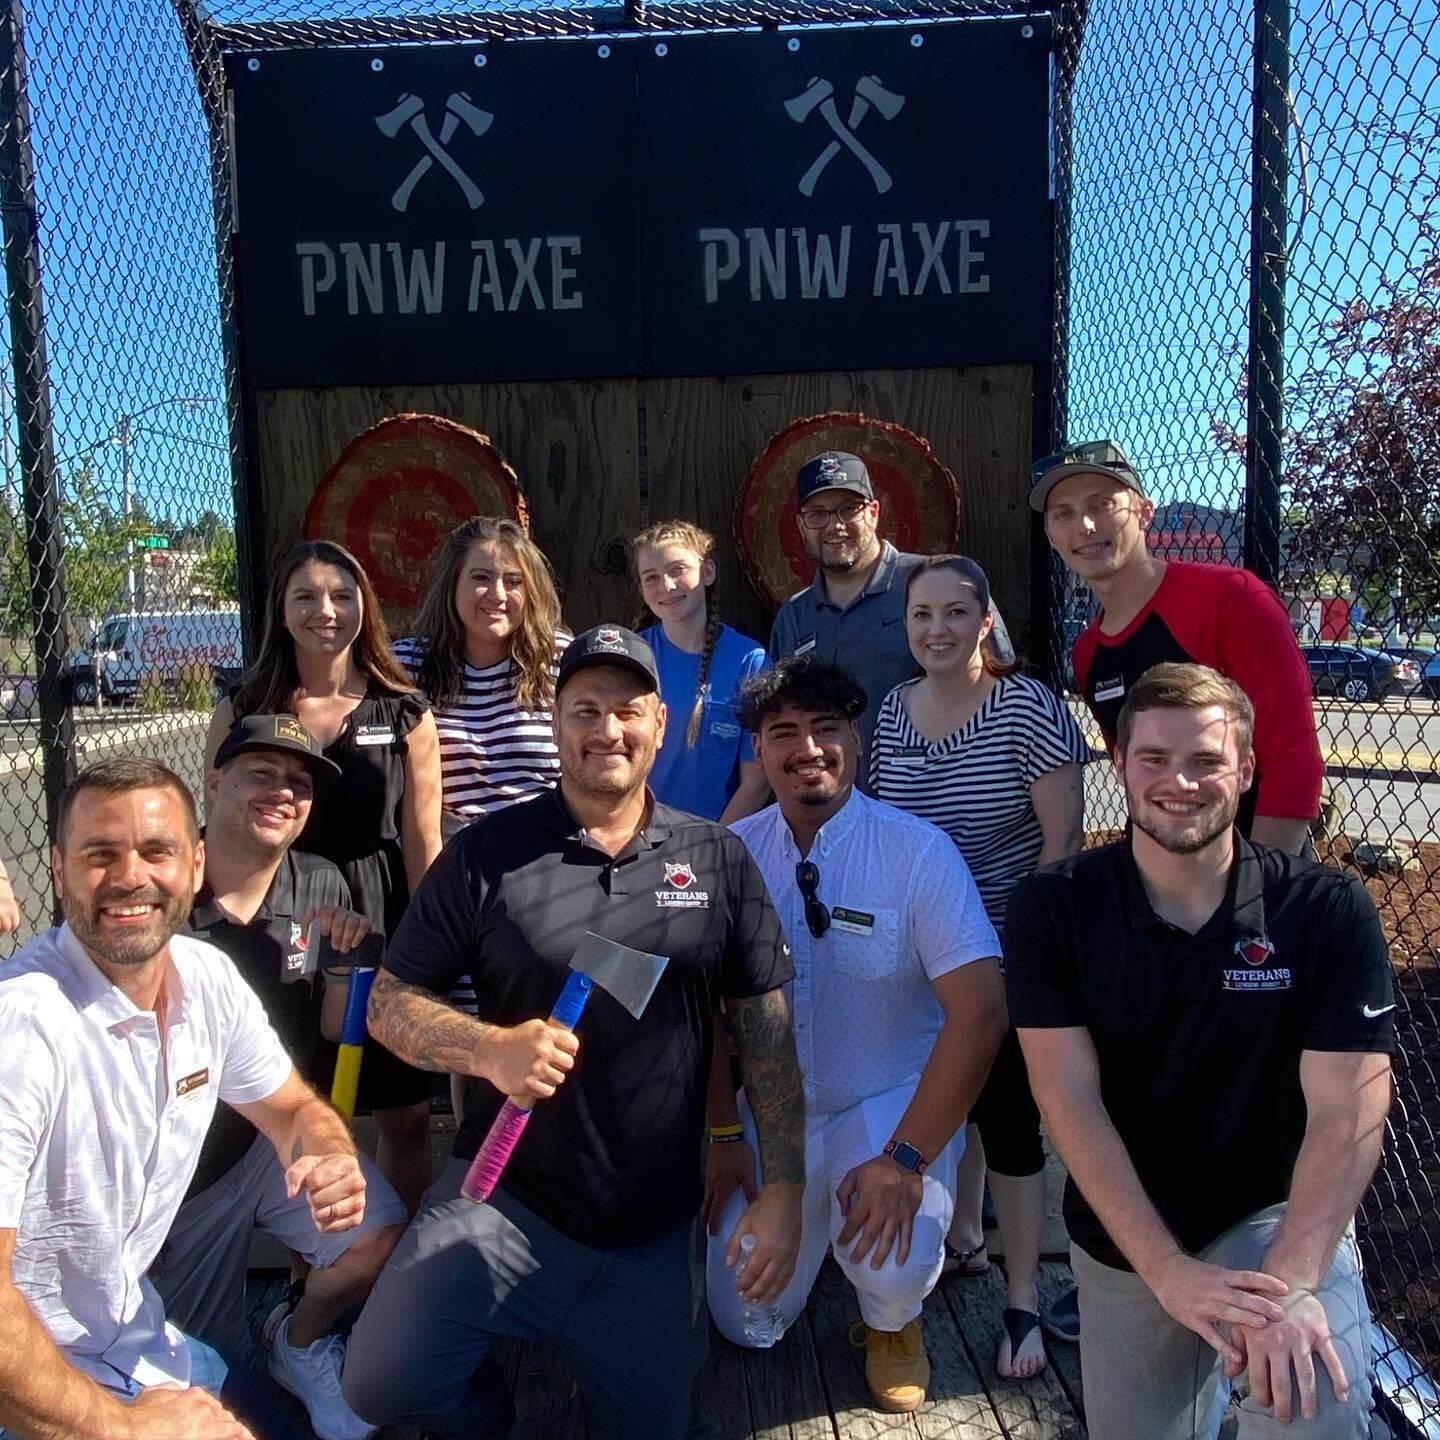 Congrats to @veteranslendinggroup on their Grand Opening for their new location in Lakewood! Thanks for having us out! #pnwaxe #axeparty #grandopening